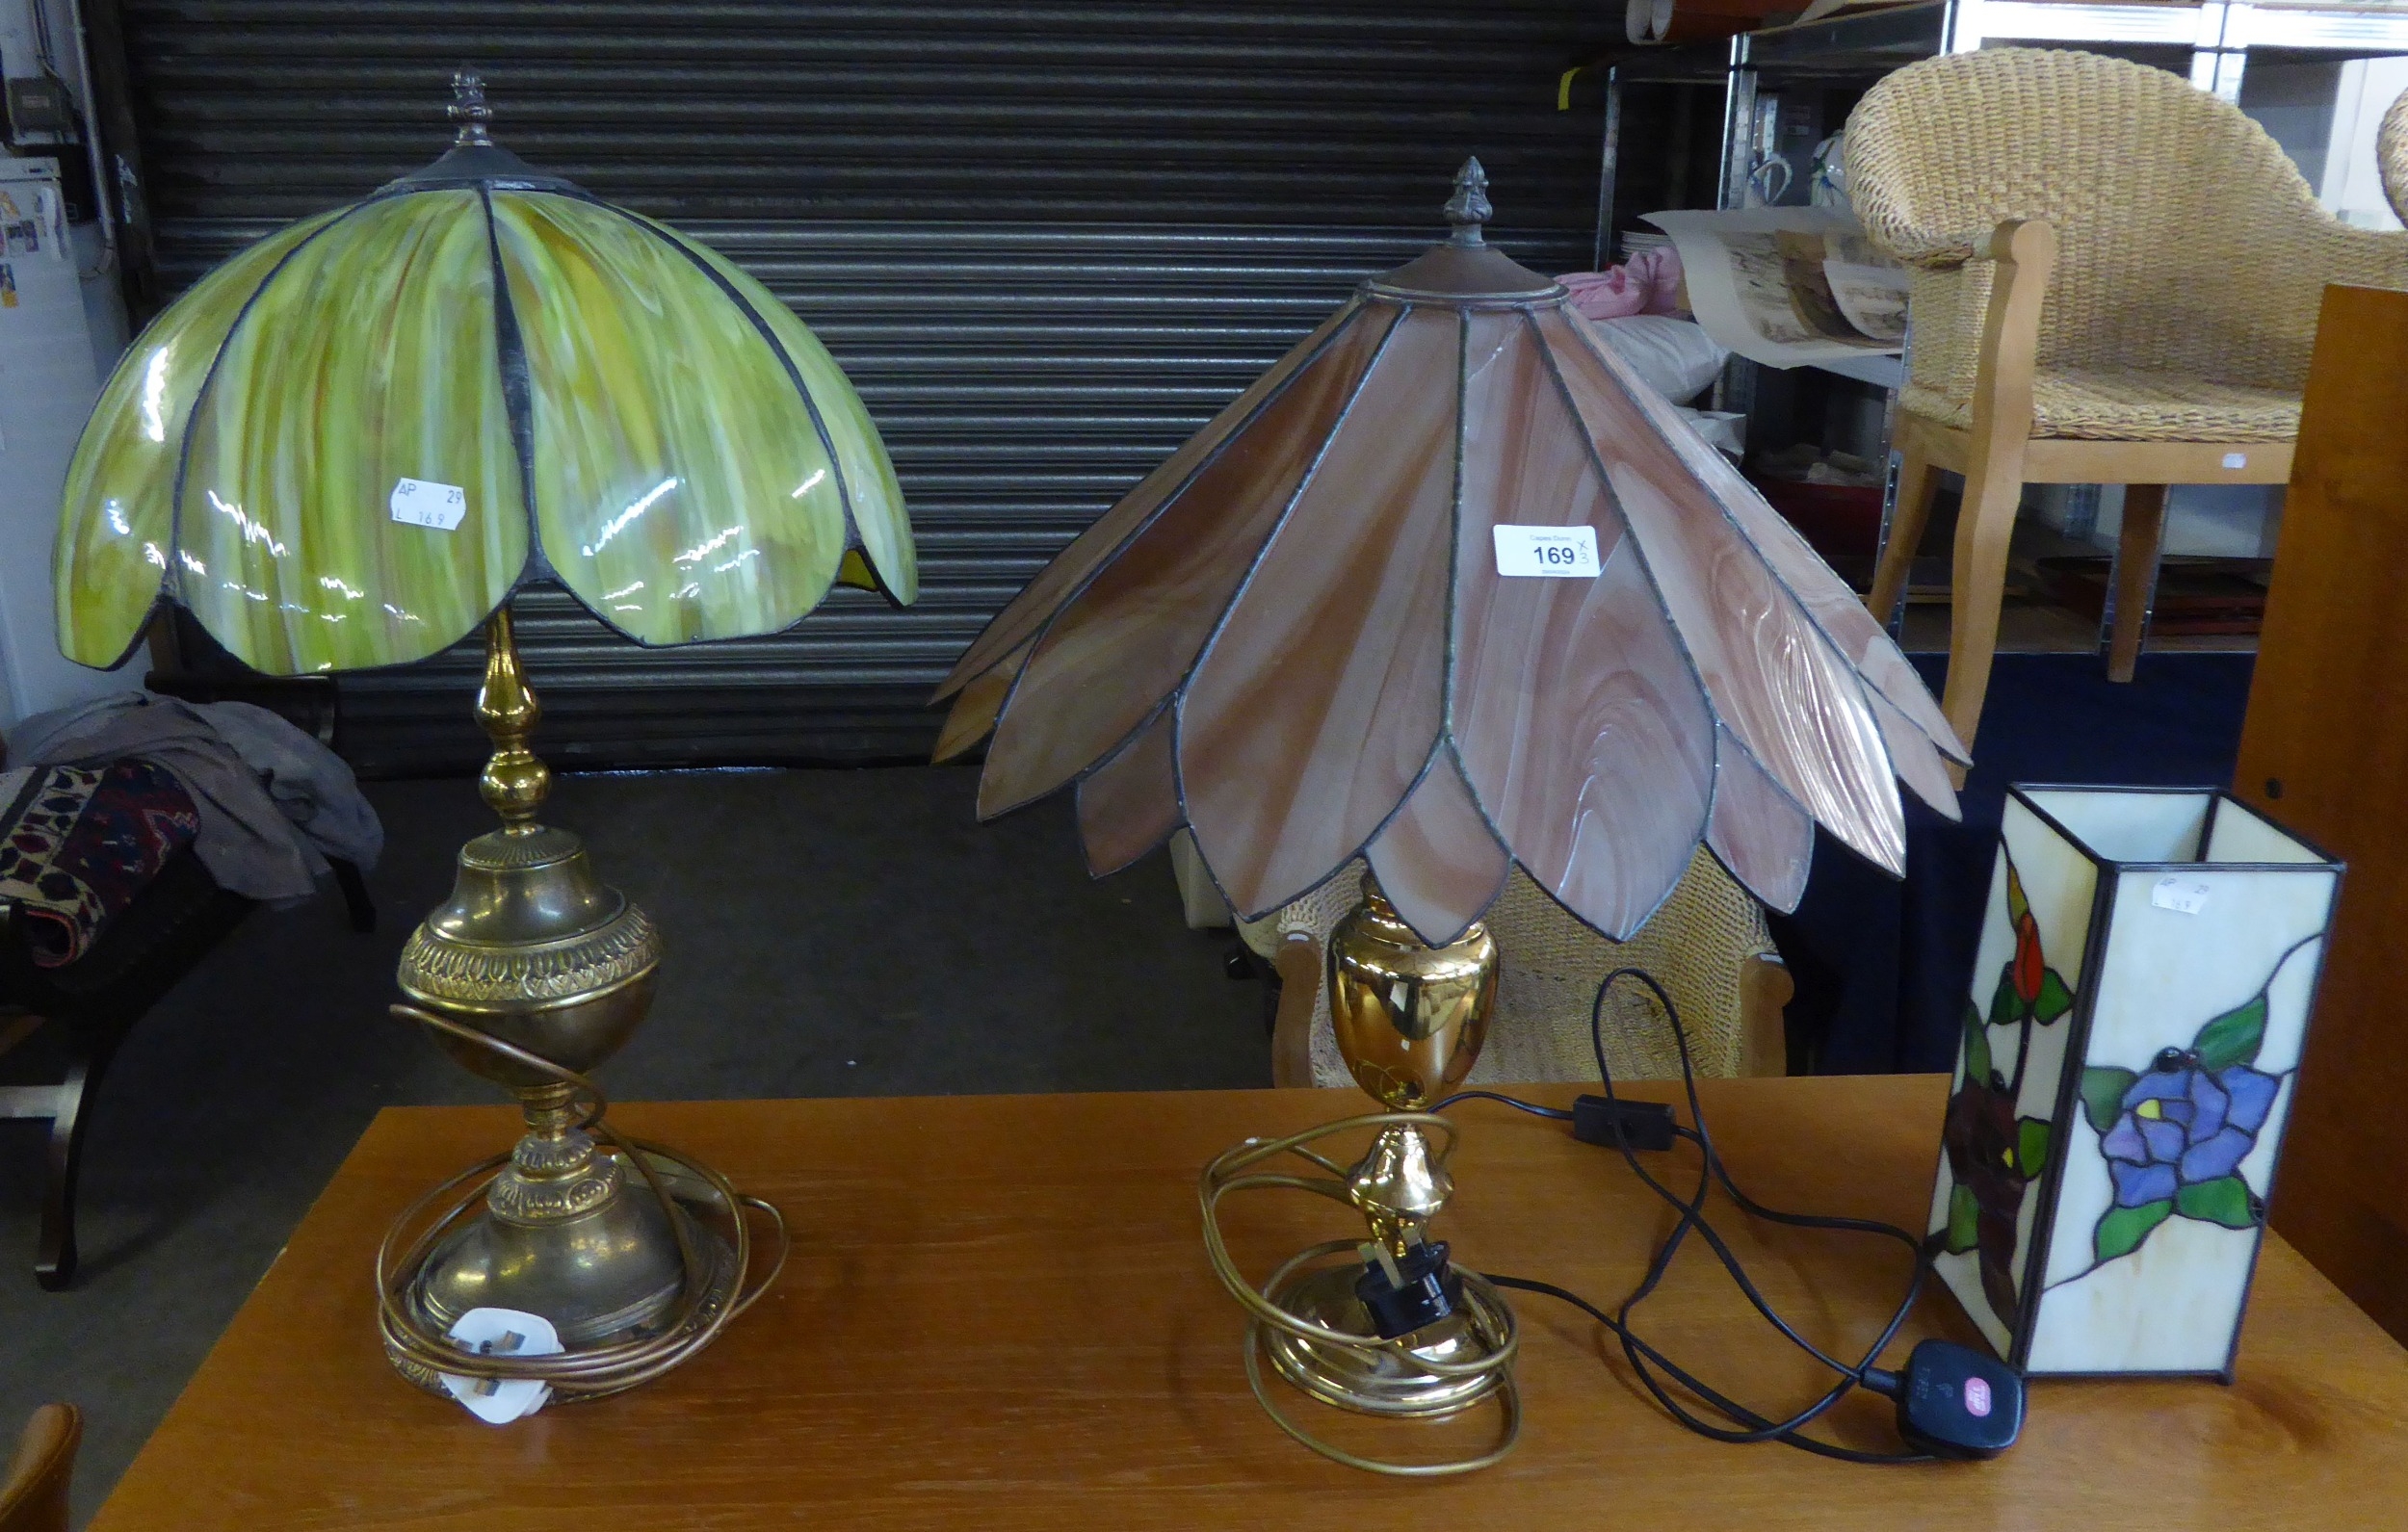 THREE TIFFANY STYLE TABLE LAMPS WITH RESIN SHADES, (1 SHADE A.F.) ON METAL BASES (3)